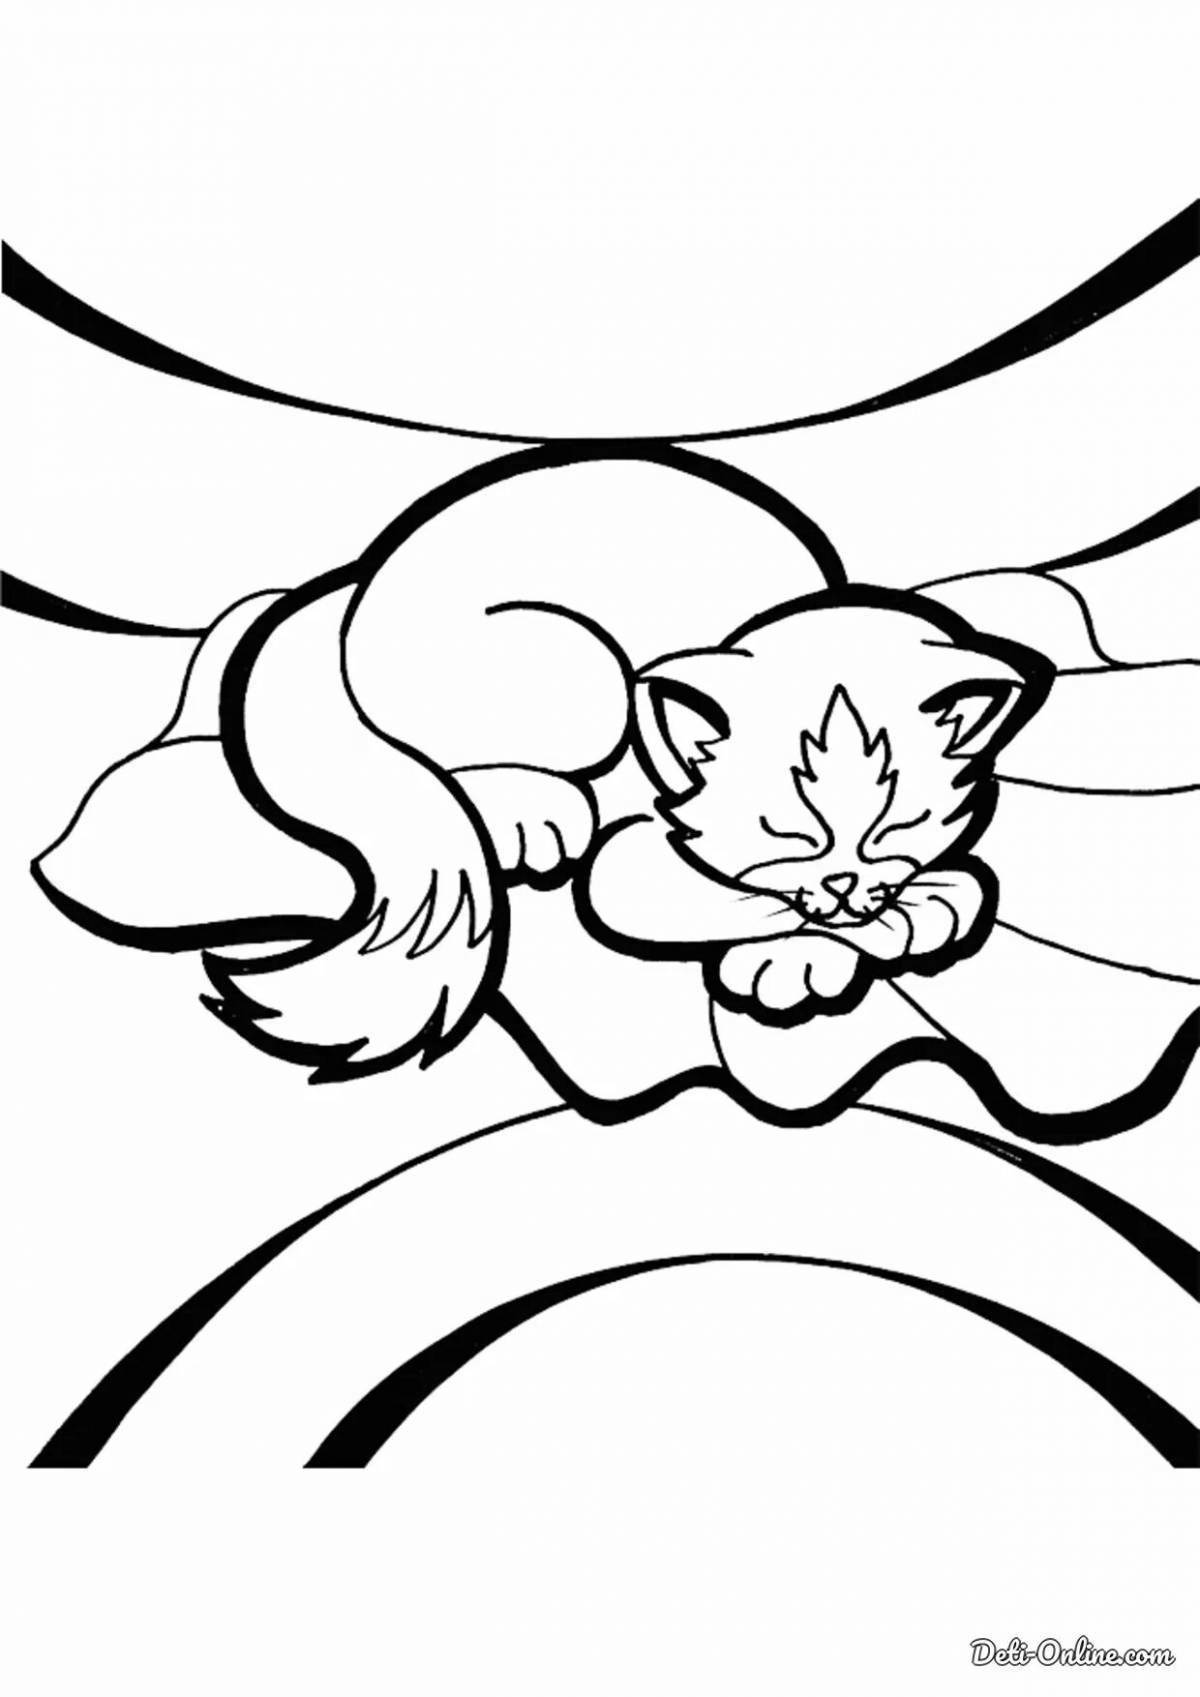 Sleeping cat coloring page